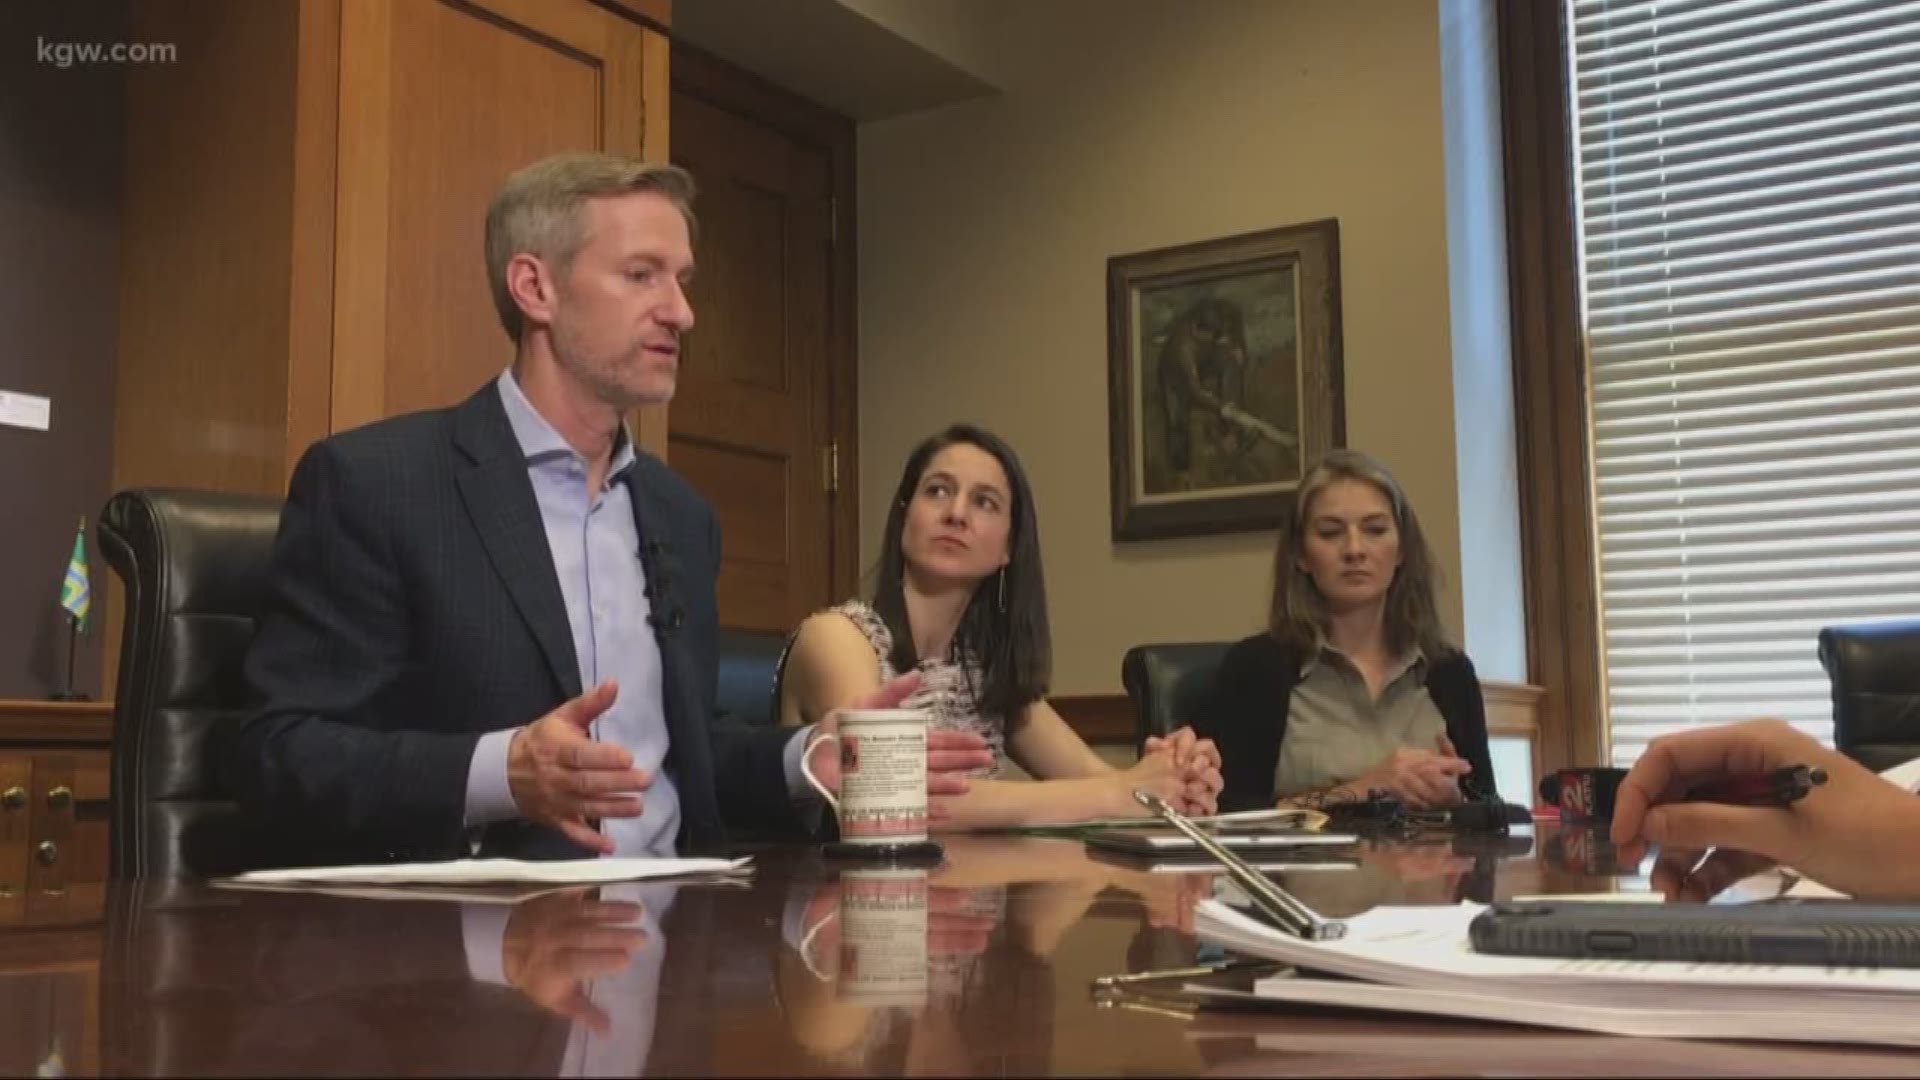 Portland Mayor Ted Wheeler unveiled his proposed budget